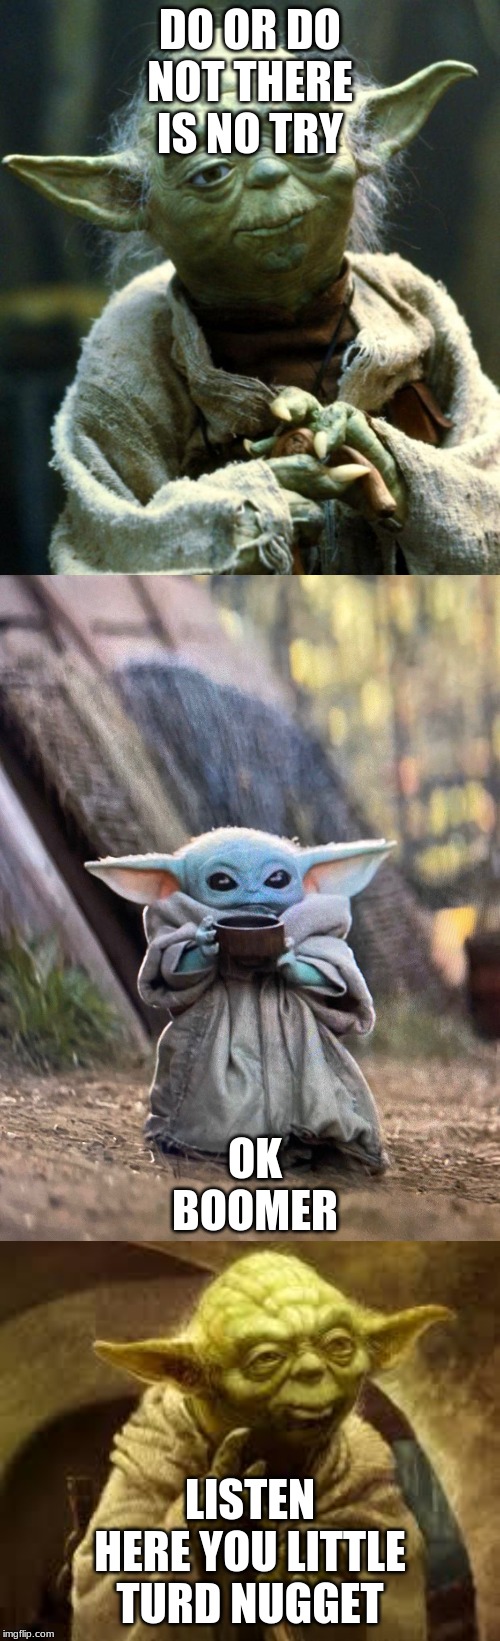 DO OR DO NOT THERE IS NO TRY; OK BOOMER; LISTEN HERE YOU LITTLE TURD NUGGET | image tagged in yoda,memes,star wars yoda,baby yoda tea | made w/ Imgflip meme maker